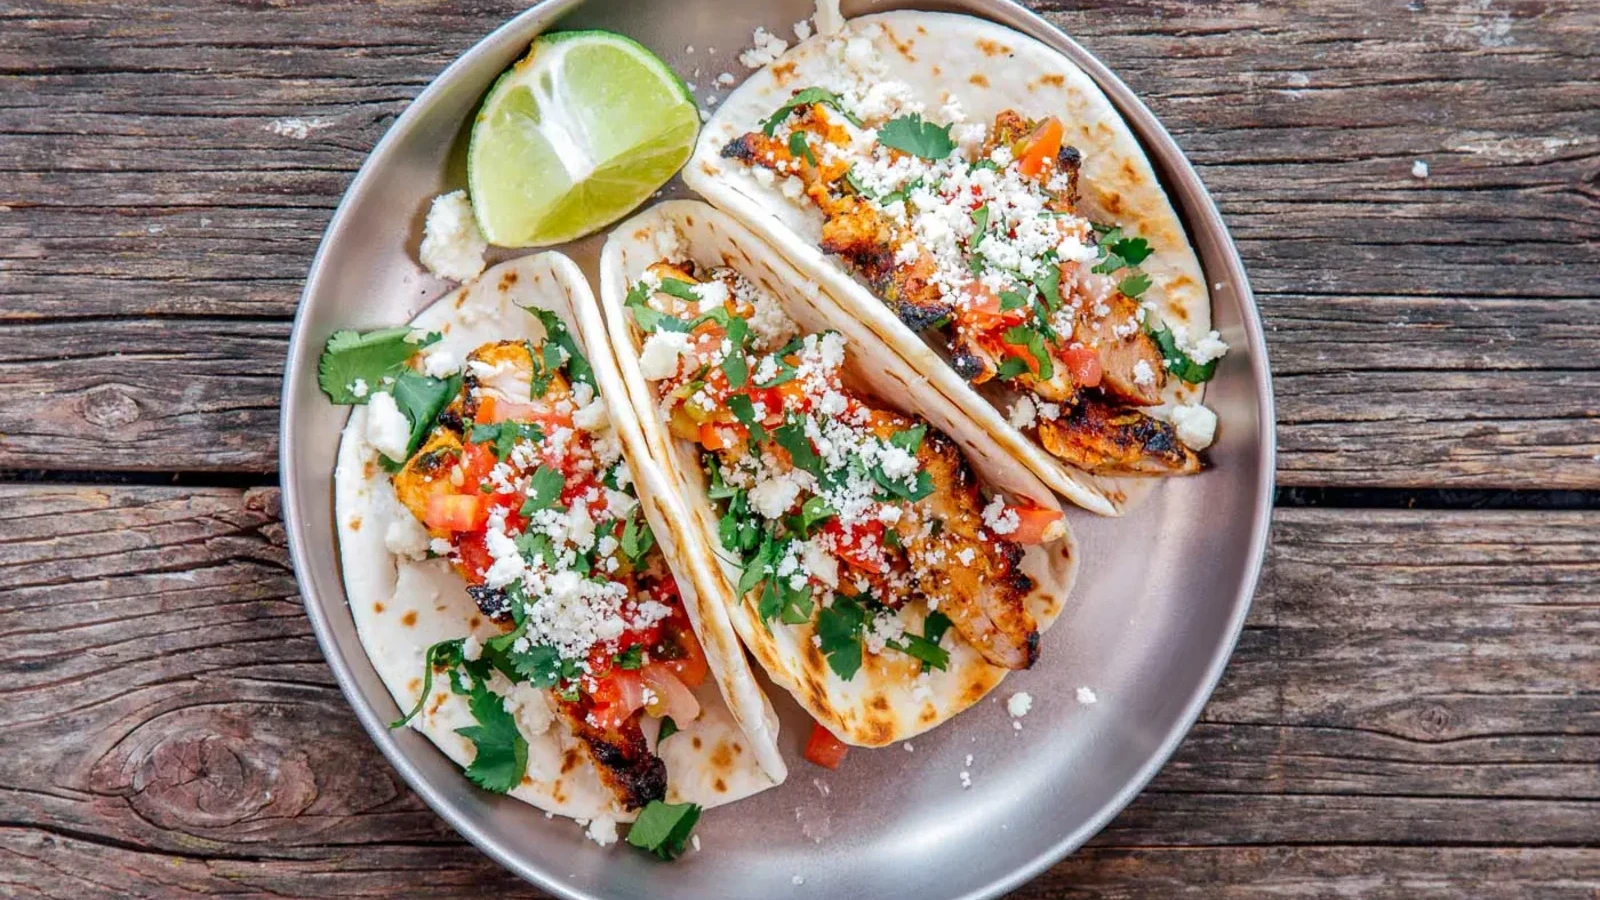 Image of Grilled Lime Chicken Tacos